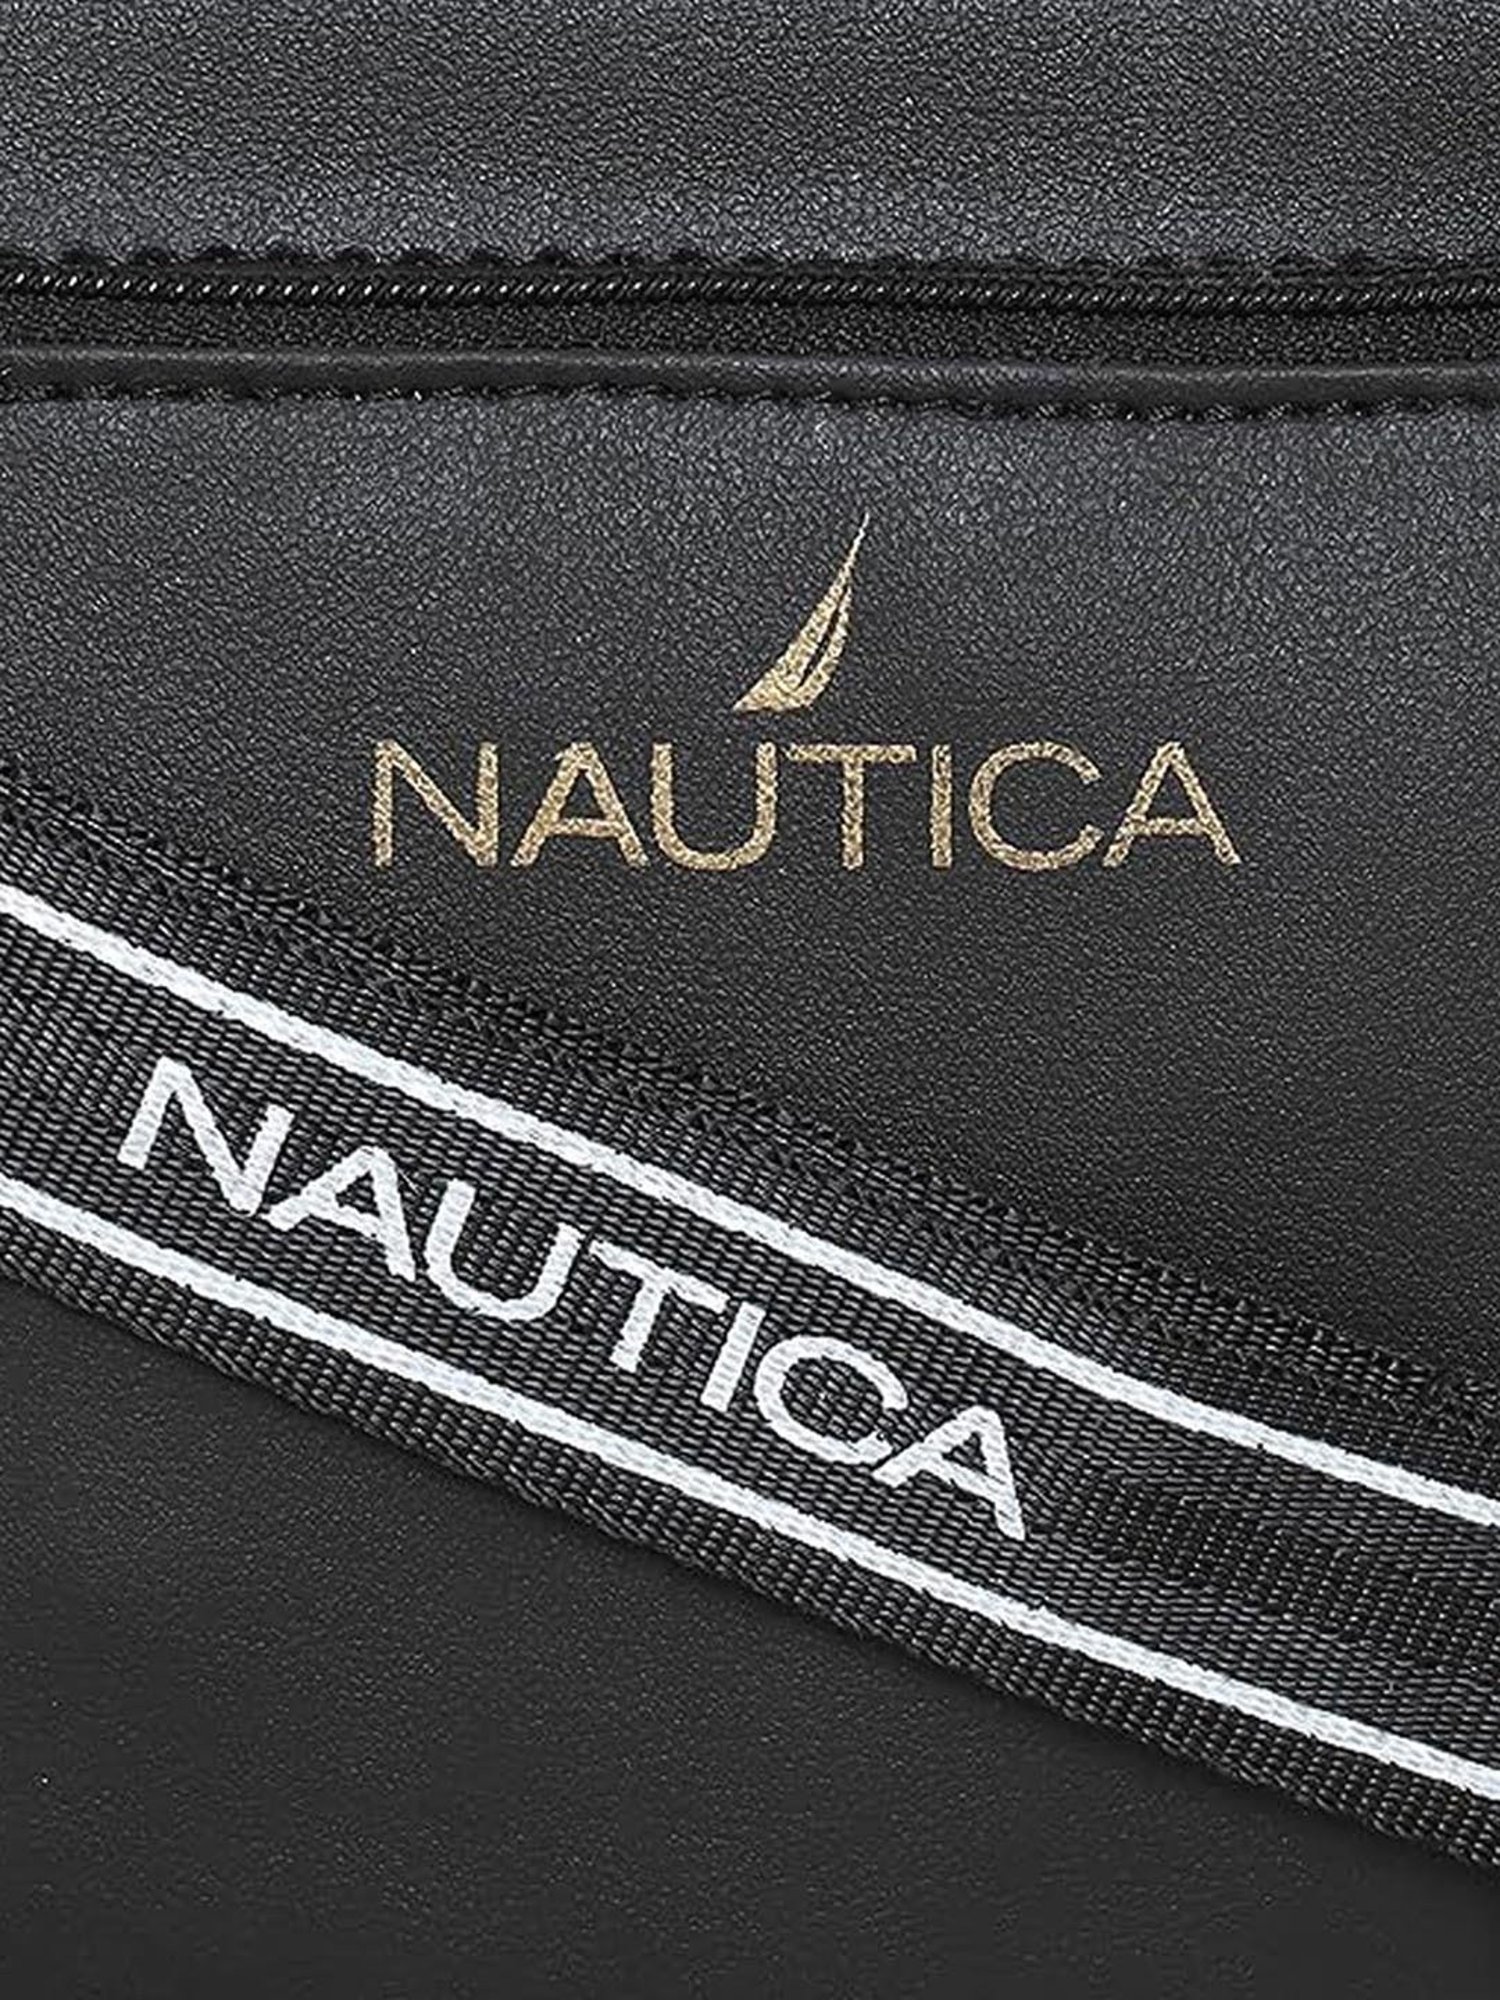 Buy Nautica Ladies Purse Handbag for Women and Girls | Gifts for Women -  NTSL4007BLK at Amazon.in